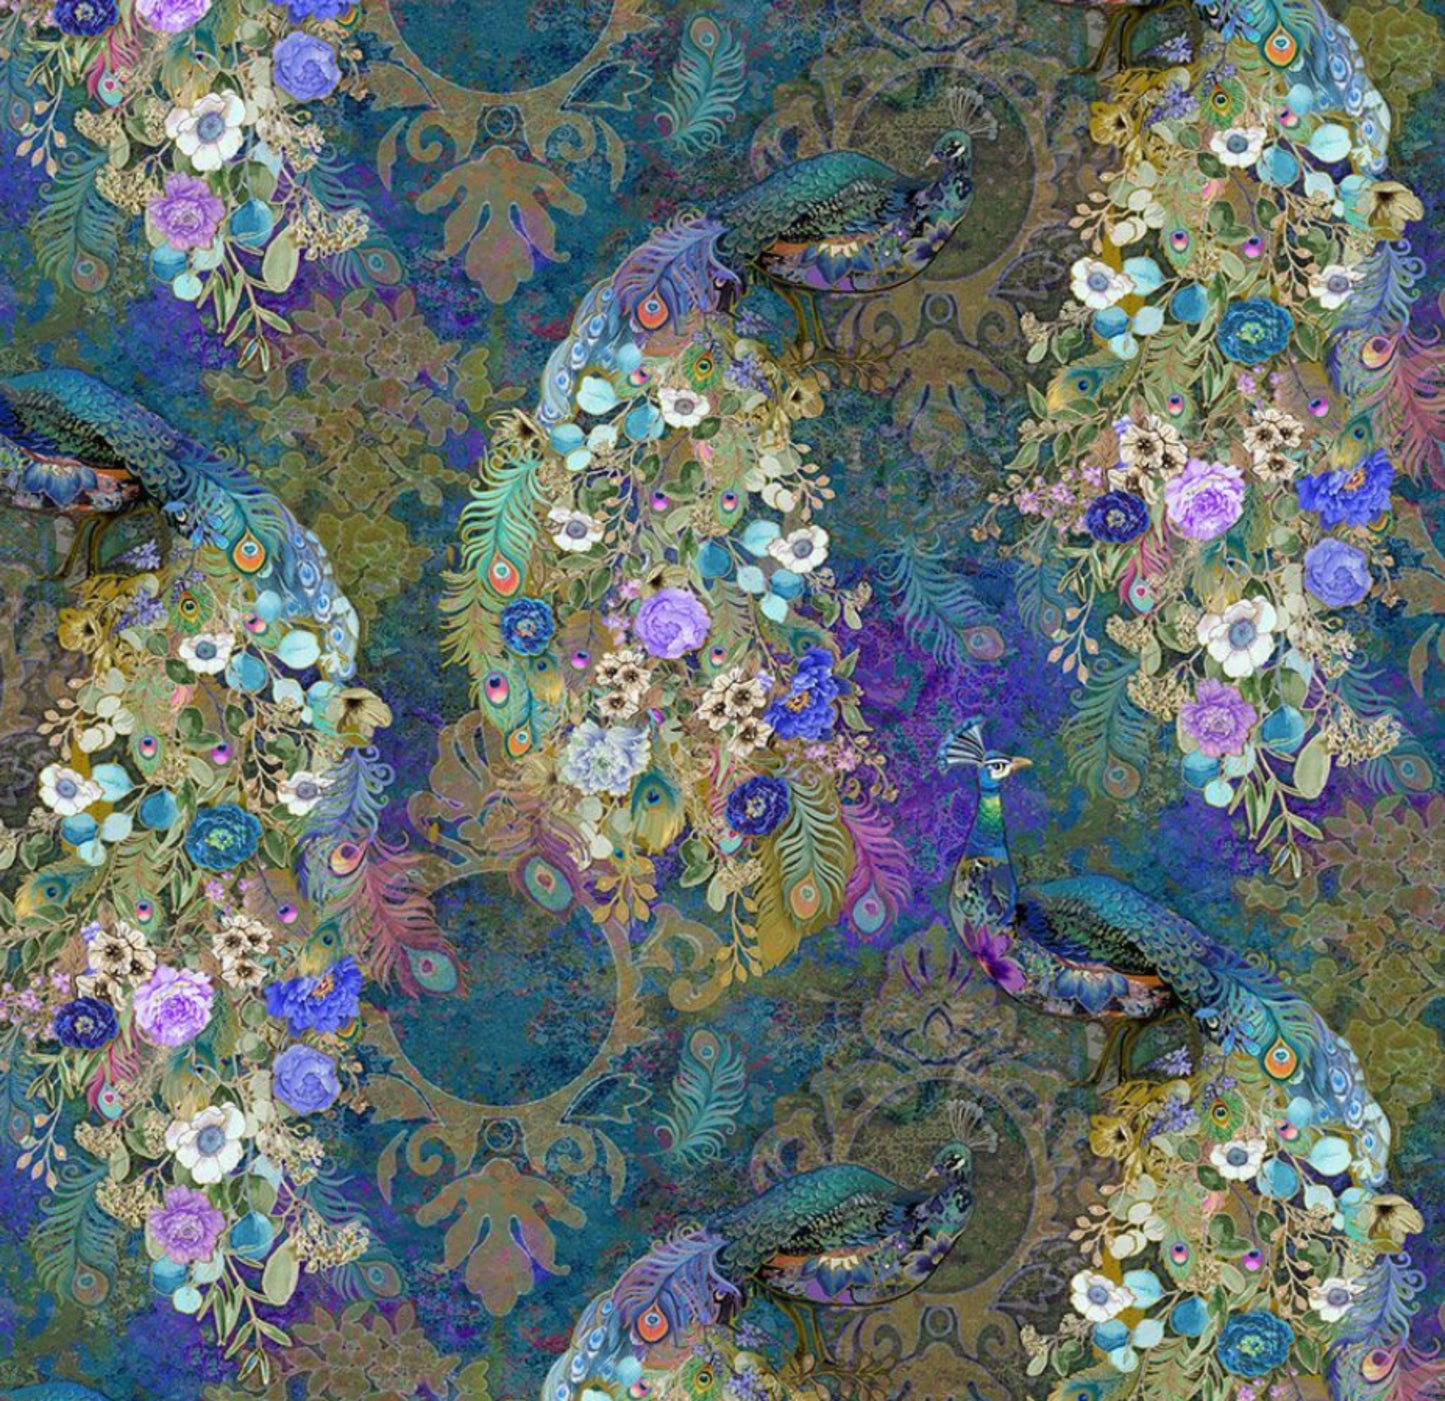 Peacock Bird Floral Fabric from the Flourish collection from timeless Treasures Fabrics